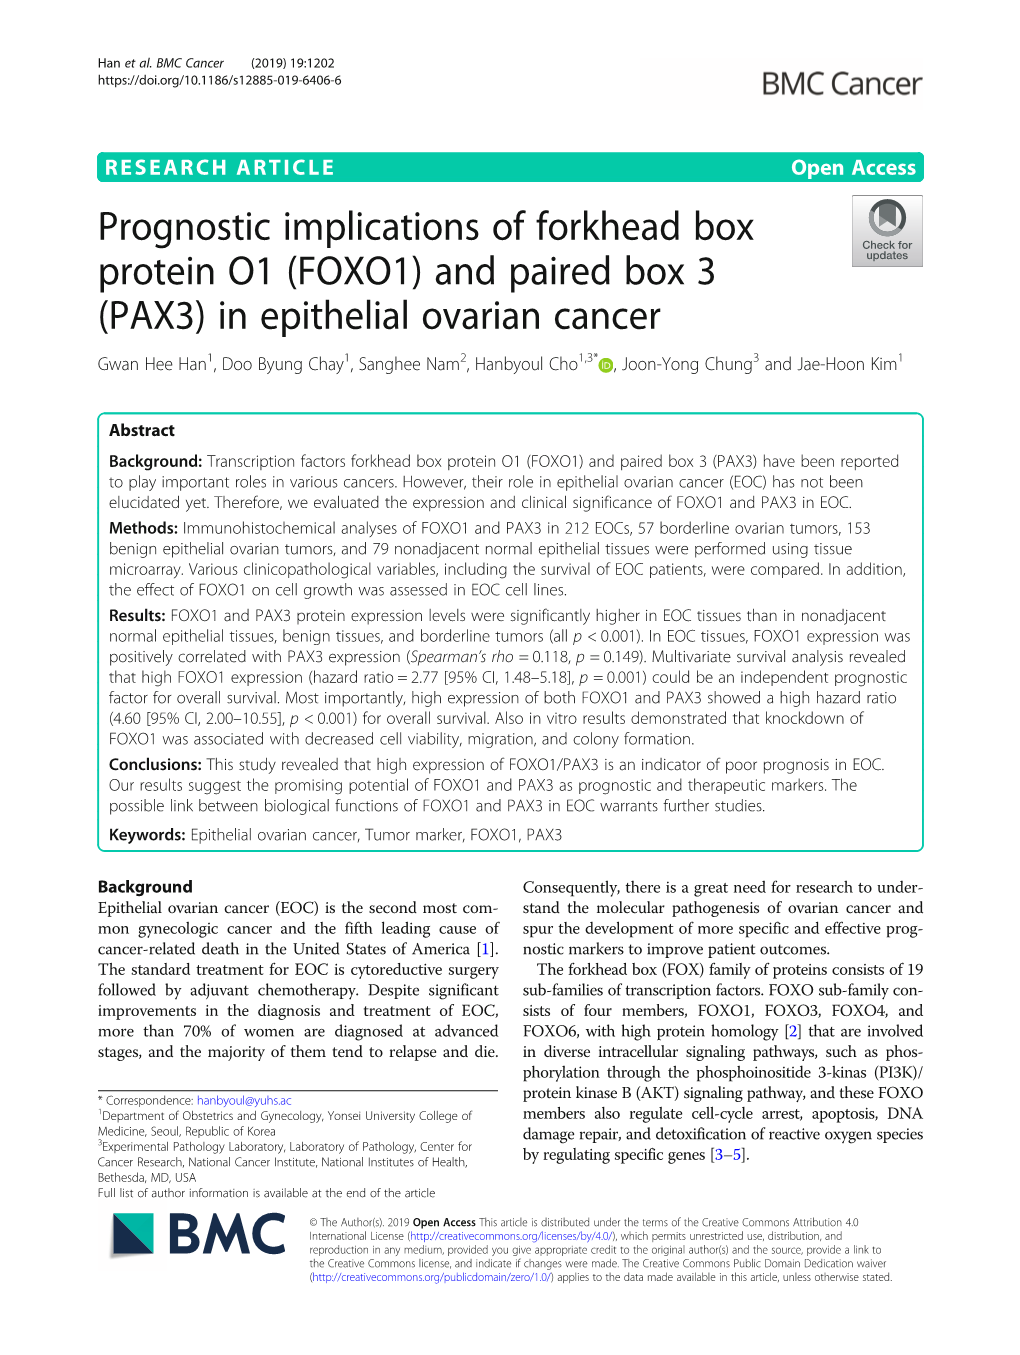 Prognostic Implications of Forkhead Box Protein O1 (FOXO1) and Paired